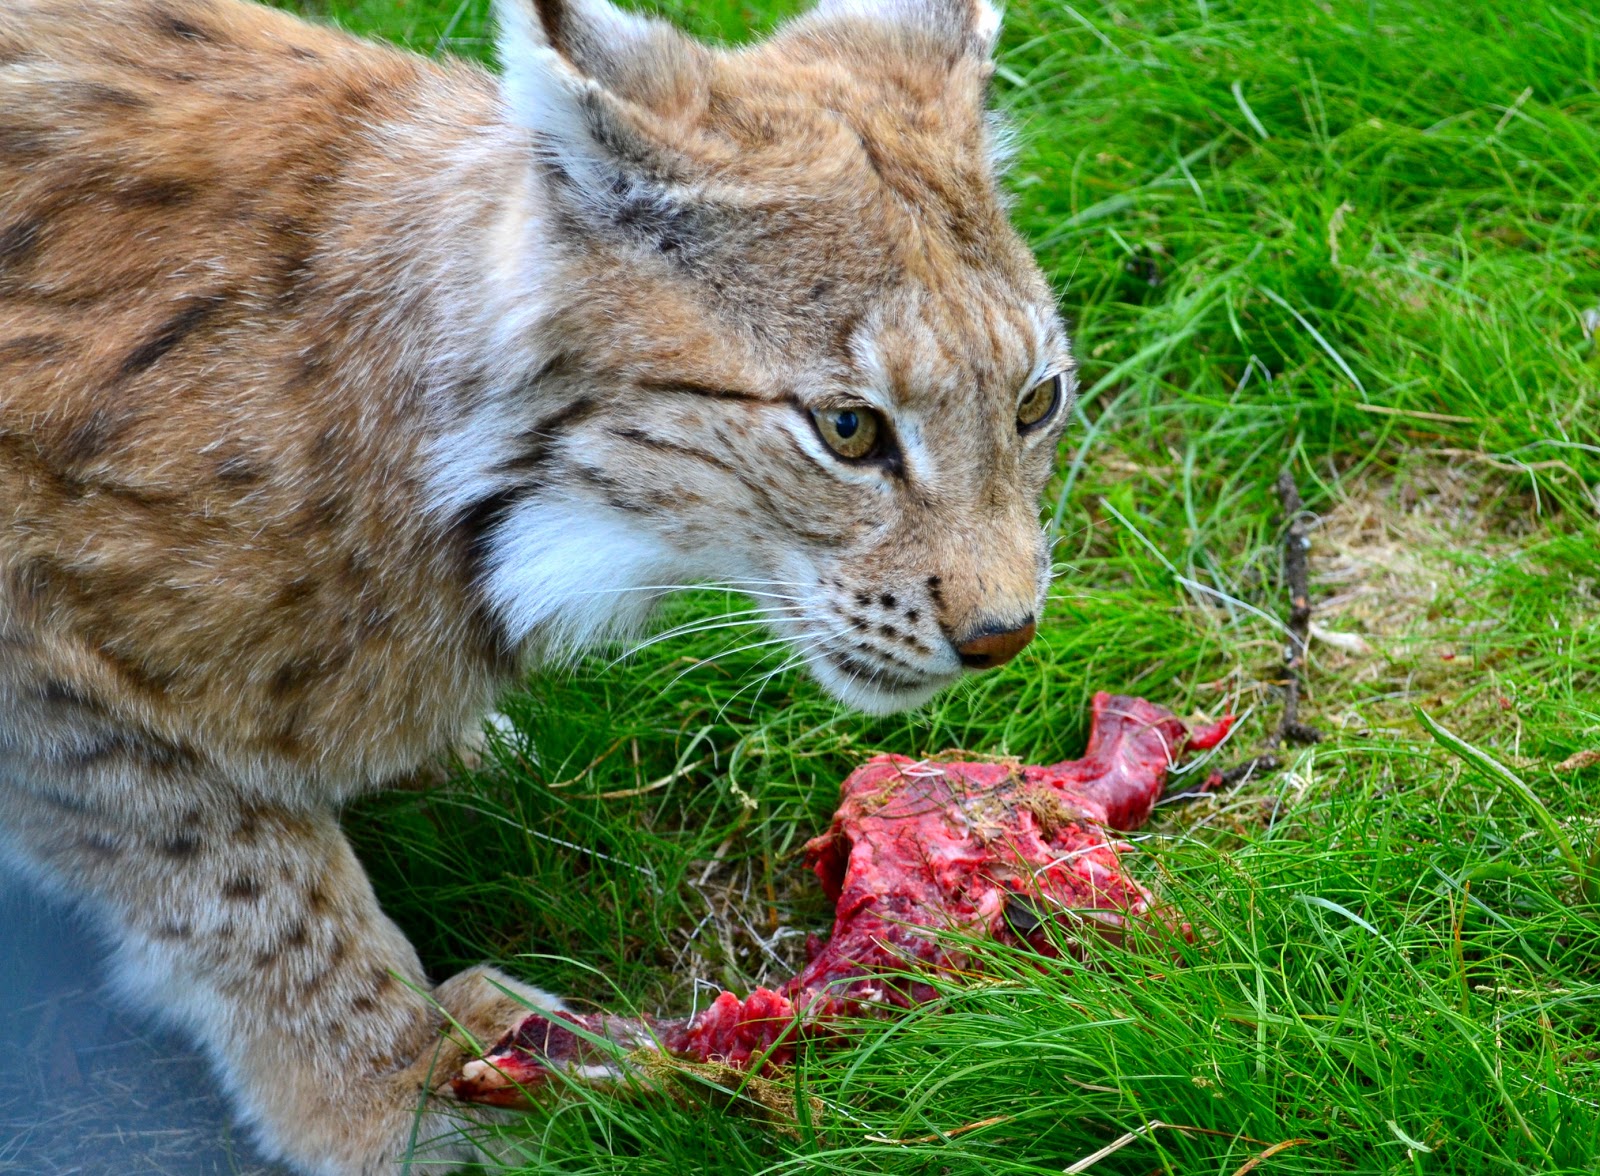 Here kitty! This stunning lynx seemed more interested in his food than us.